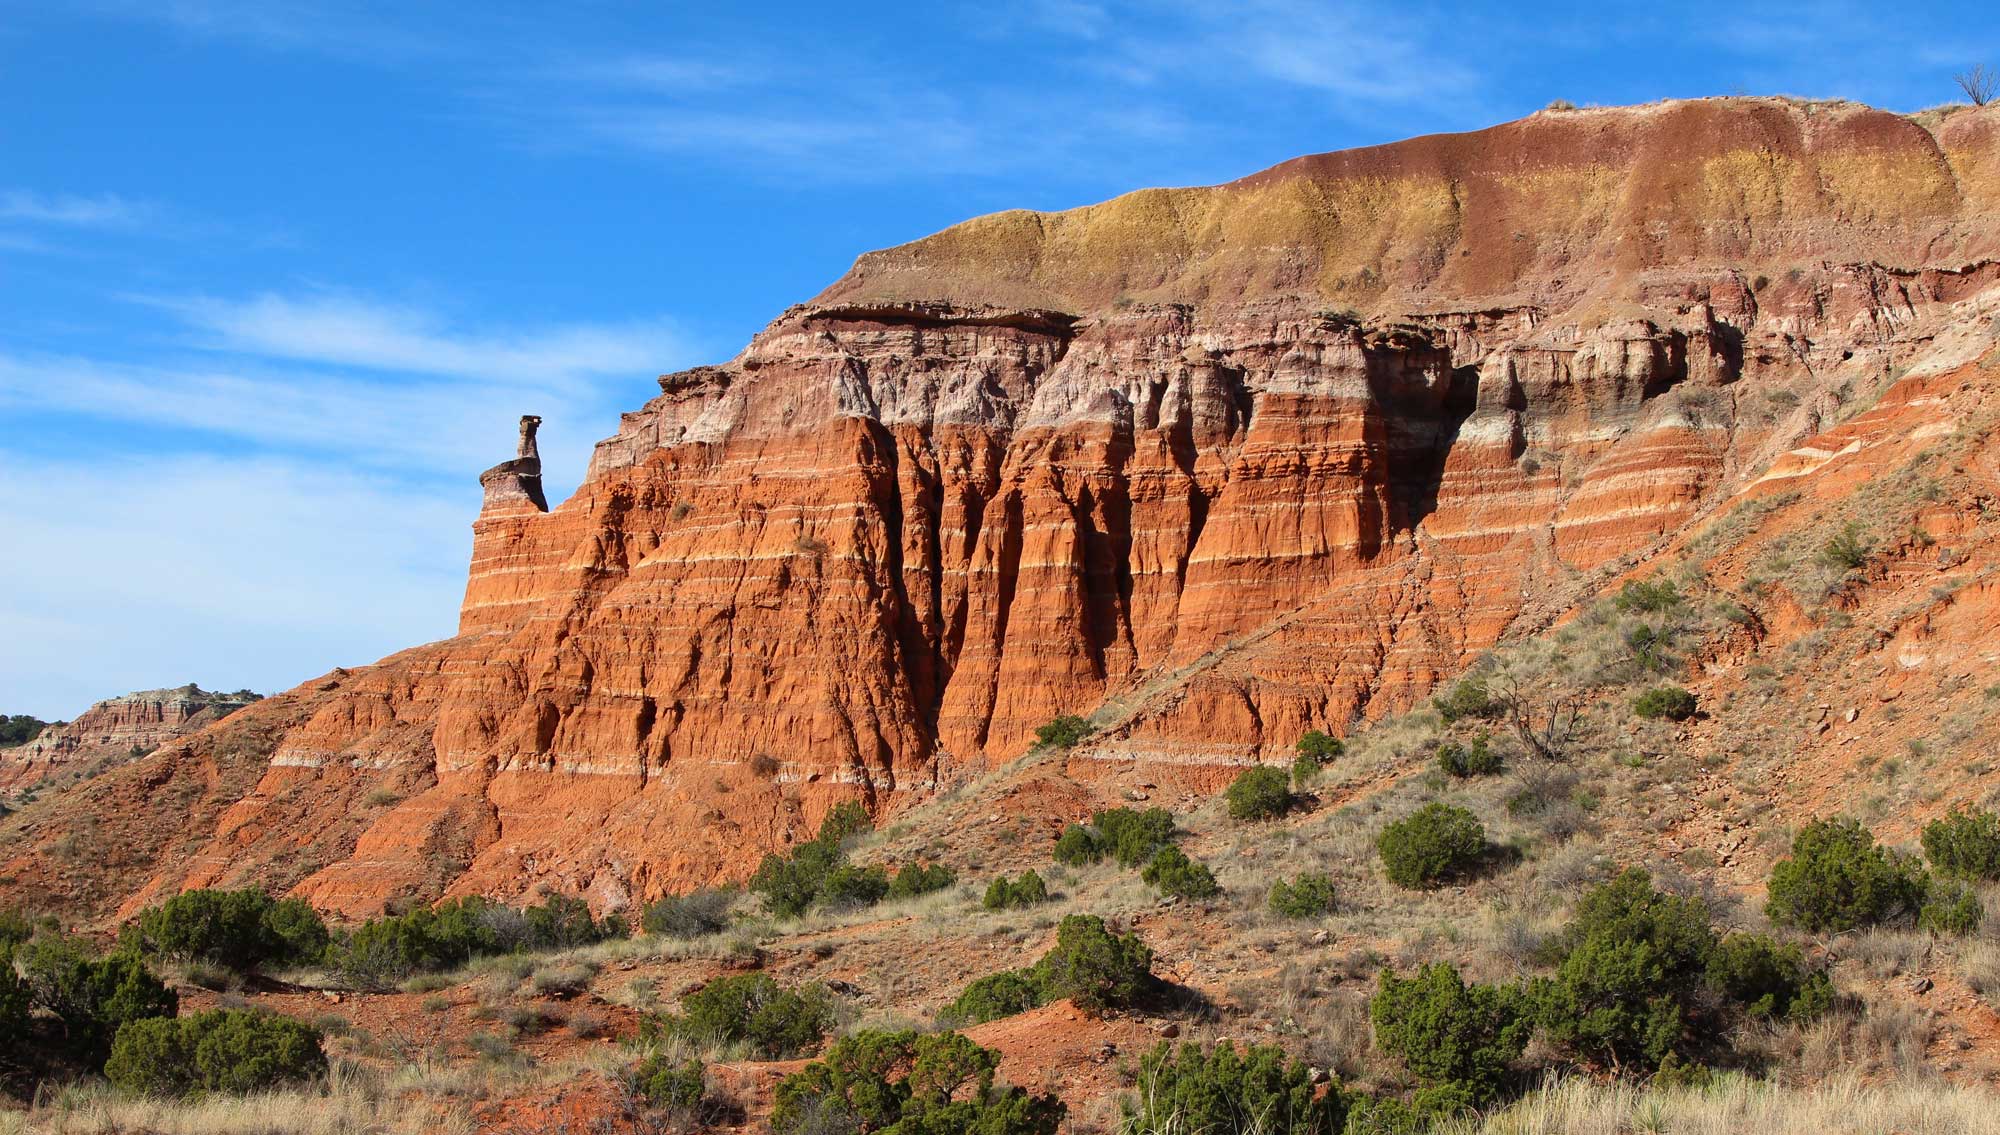 Photo of an outcrop in Palo Duro Canyon, Texas. The outcrop is made up mostly of Triassic-aged red rock.